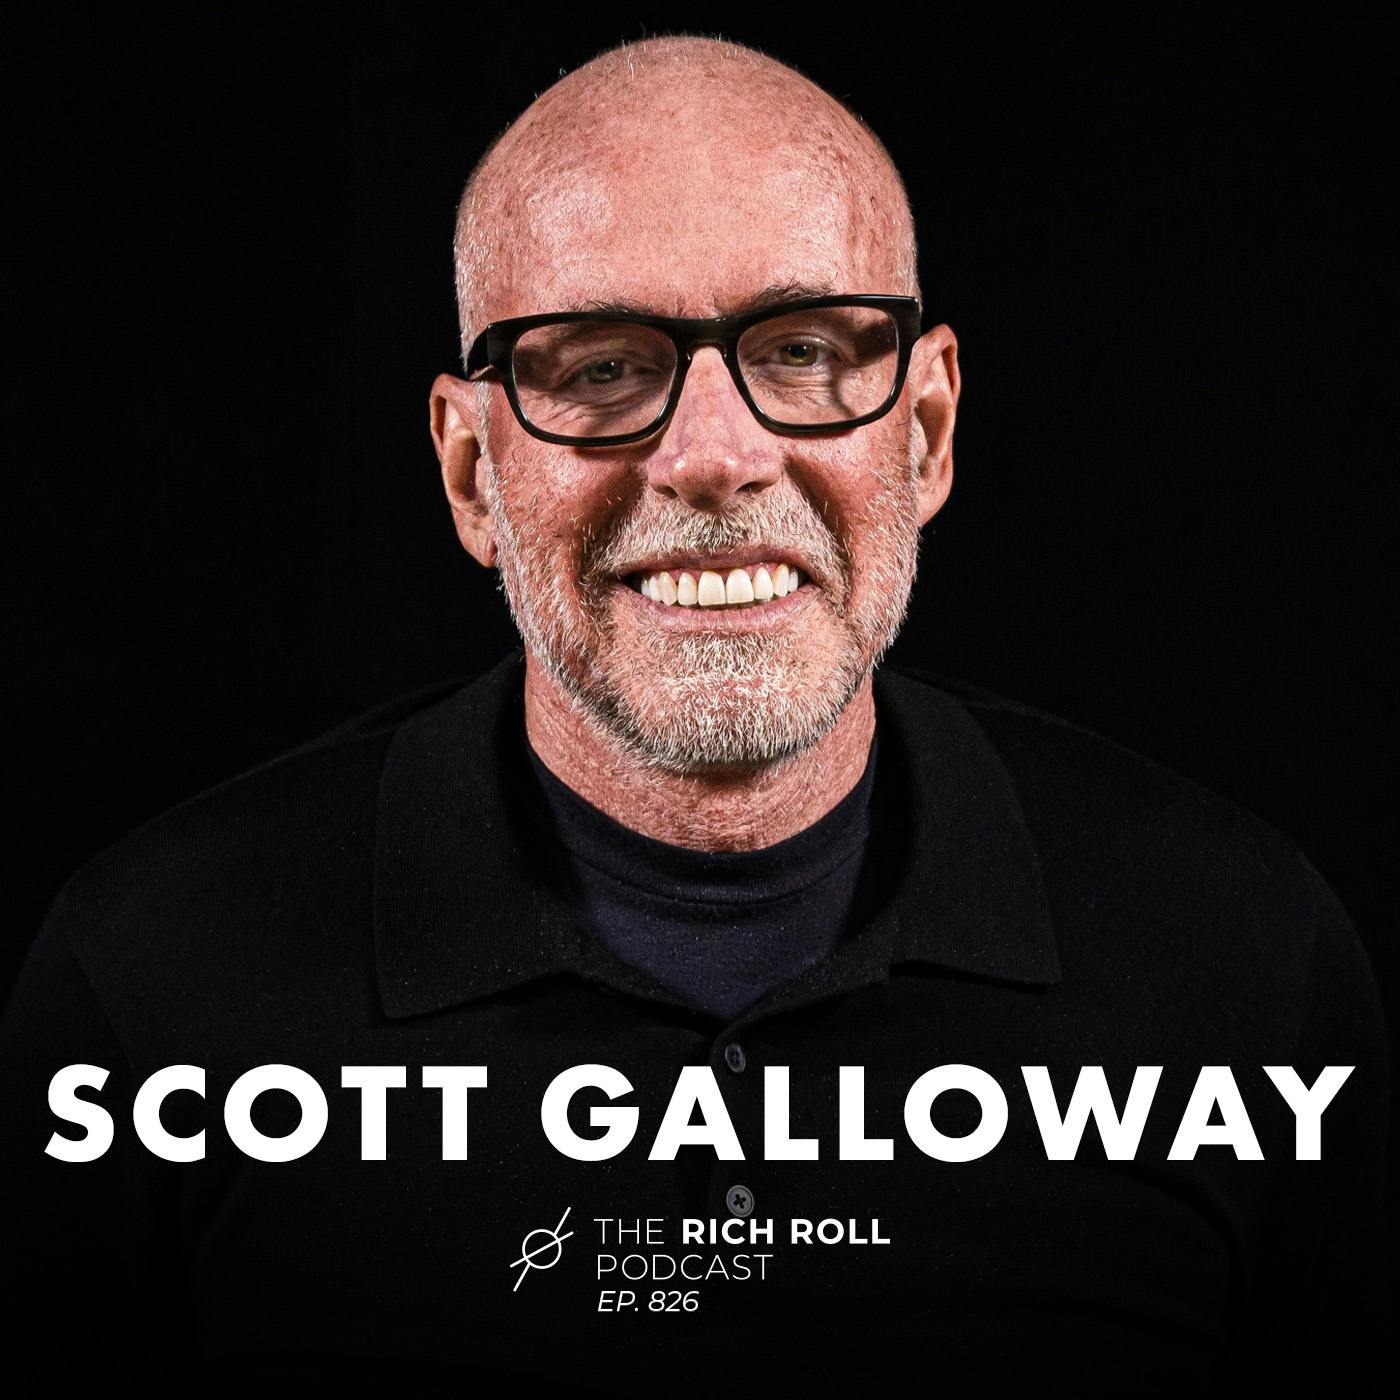 Scott Galloway on Healthy Masculinity, How to Achieve Financial Security, & Why Vulnerability Is Power